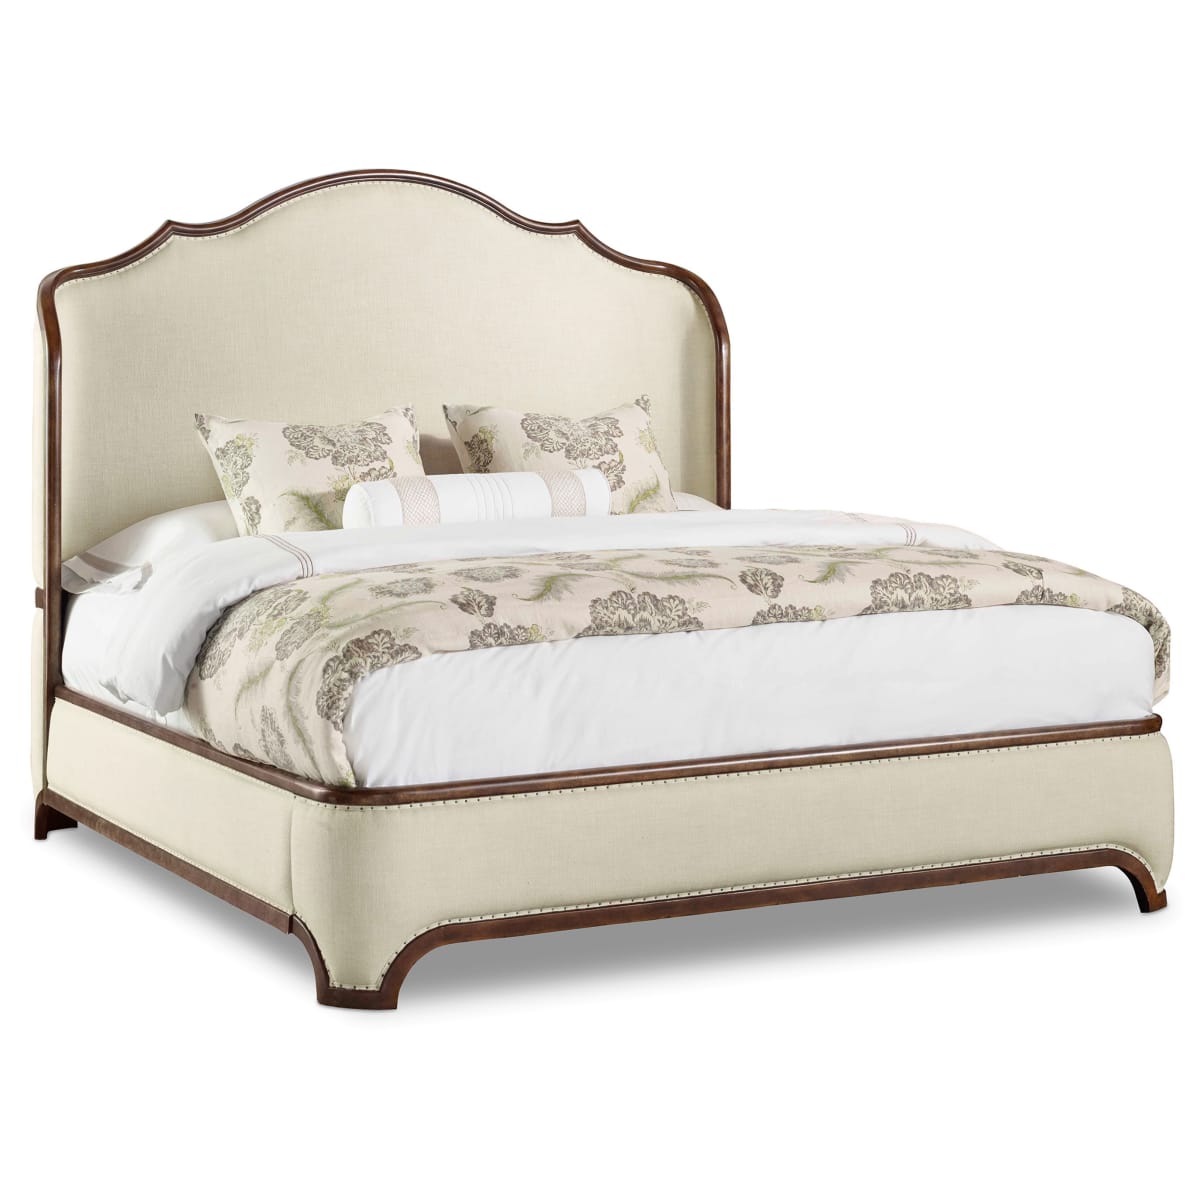 Furniture 5447 90866 Archivist, Country King Bed